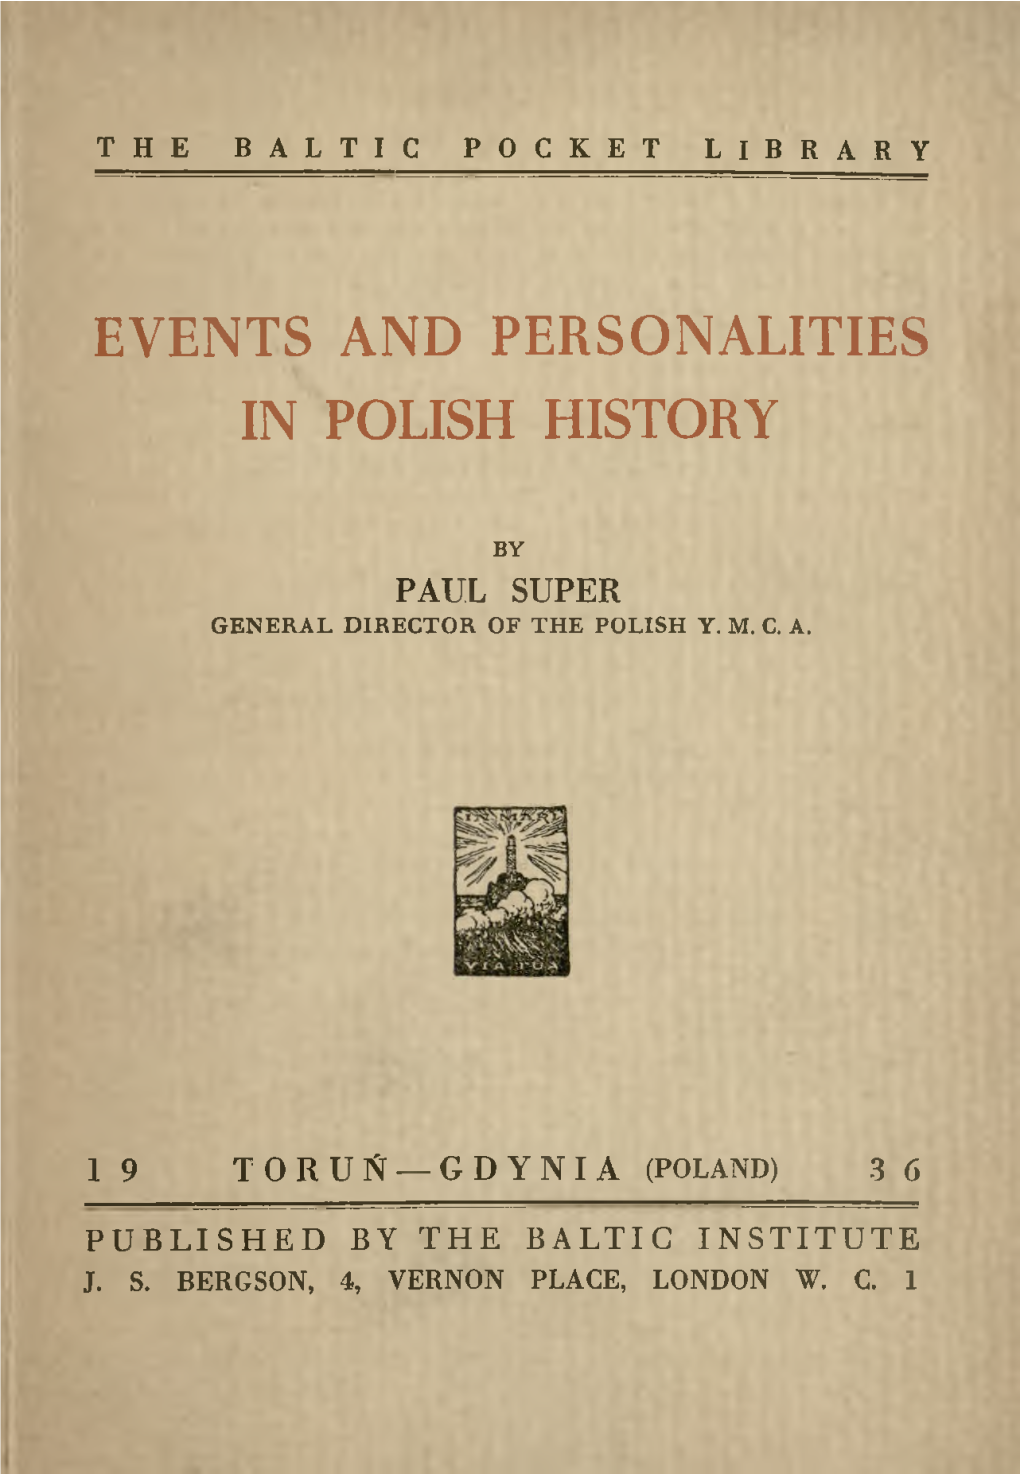 Events and Personalities in Polish History